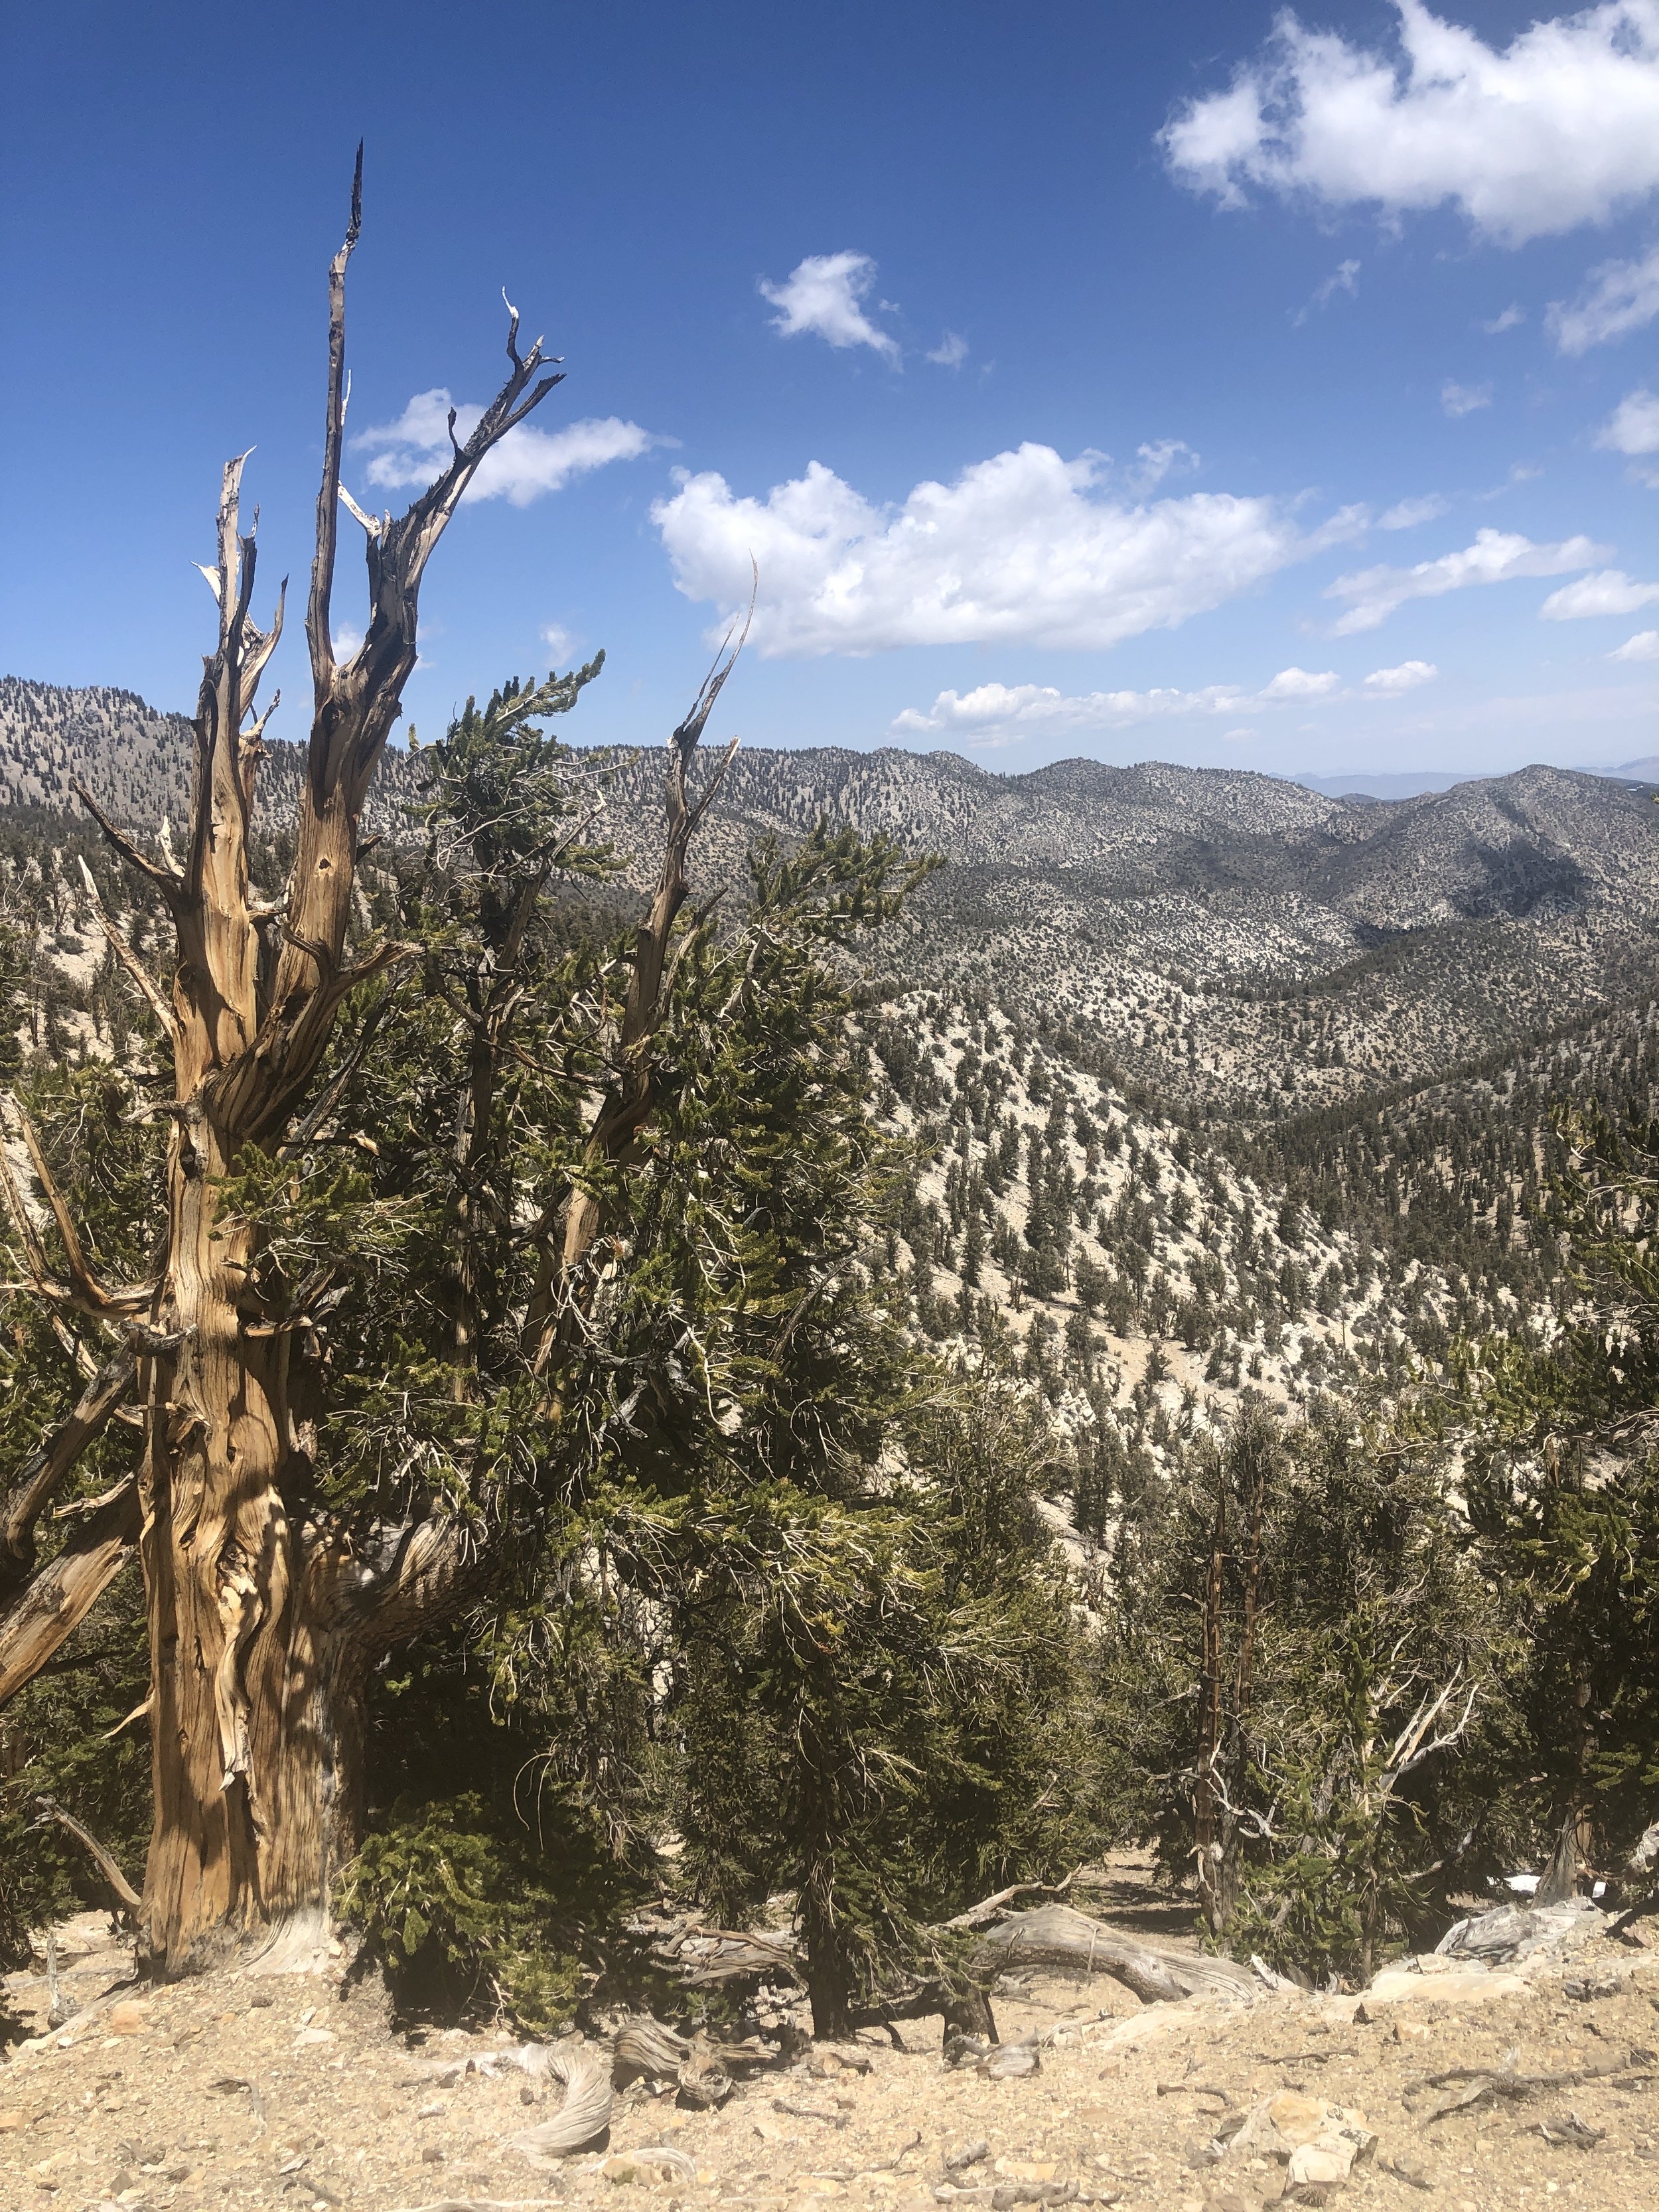 Bristlecone pines in the white mountains